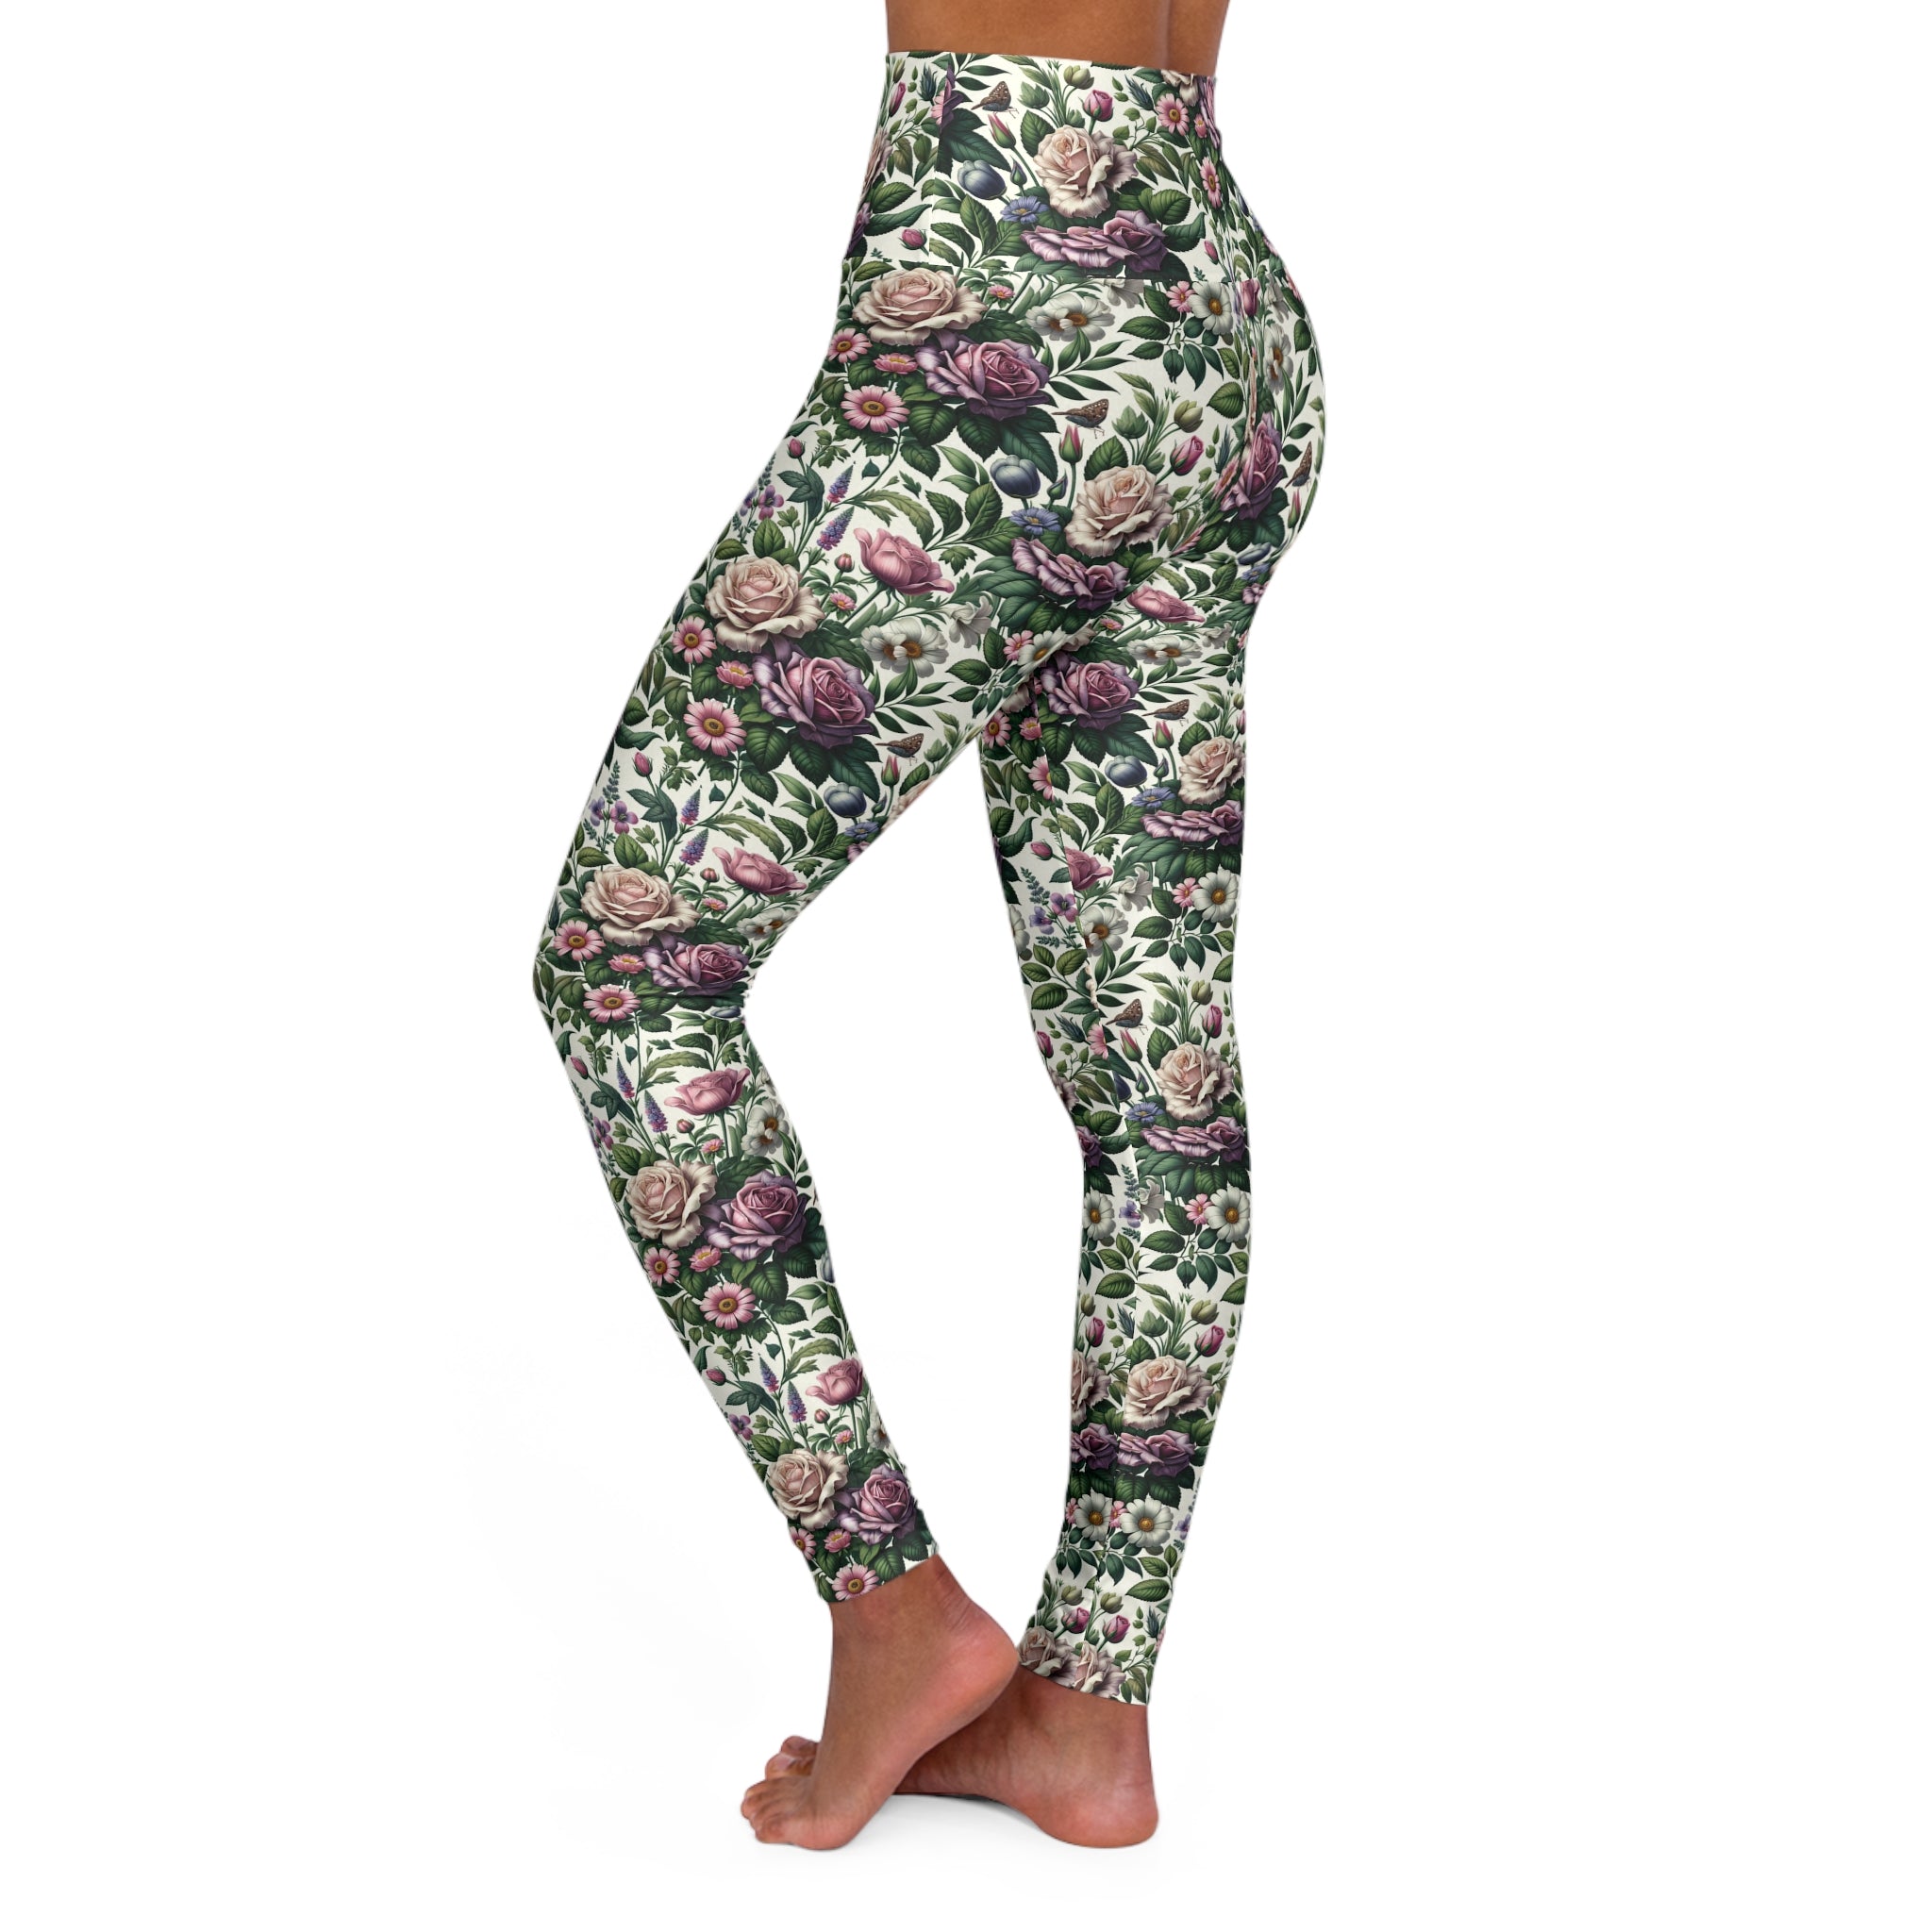 Country Flower Gym Leggings for Stylish Workouts S-2XL